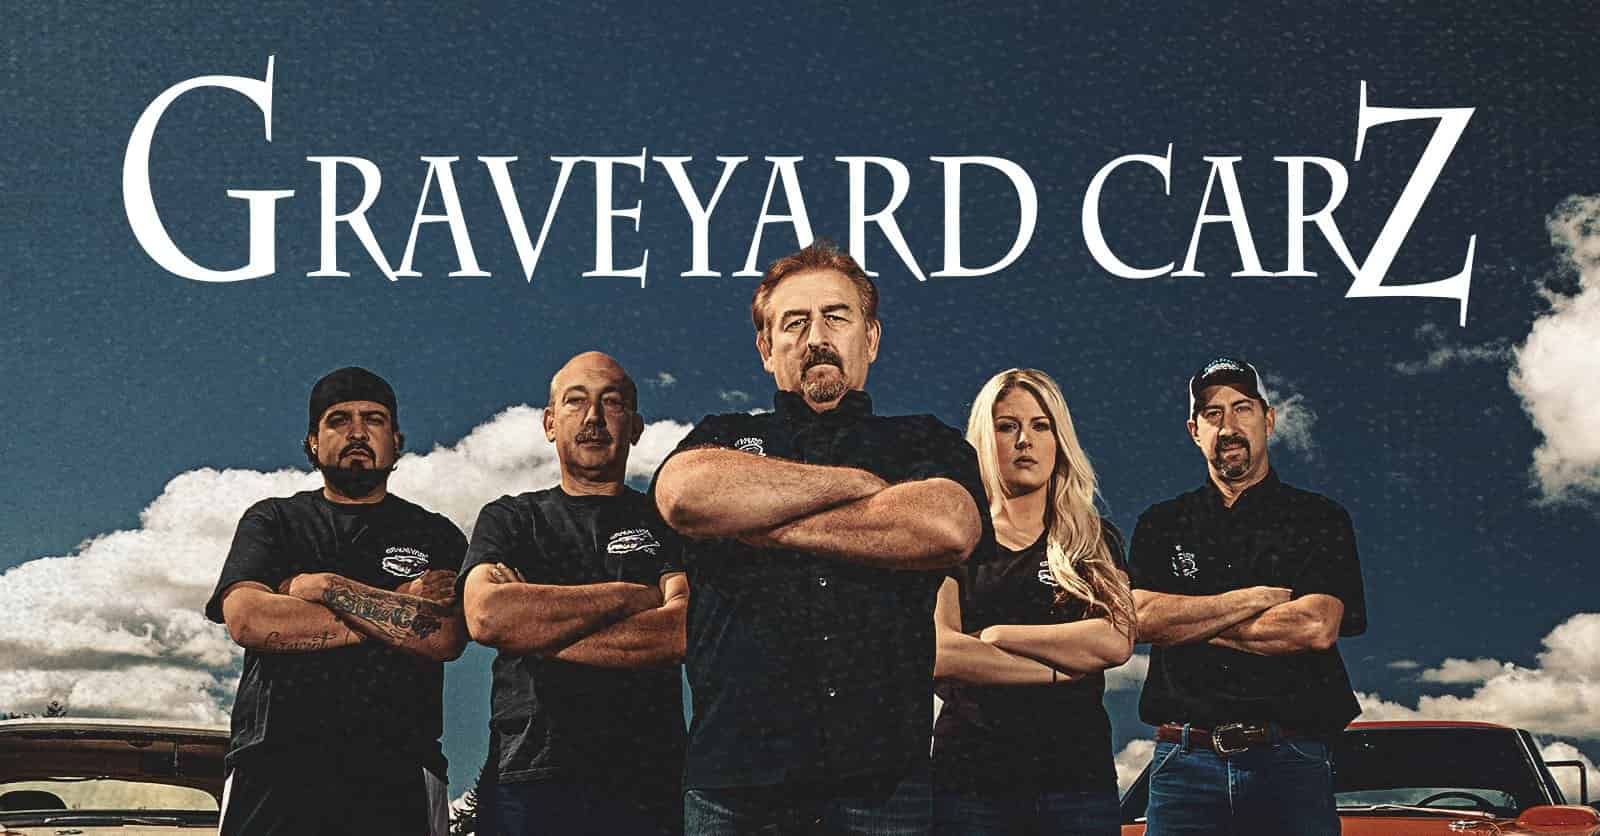 Image of Mark Worman and the rest of the Graveyard Cartz casts